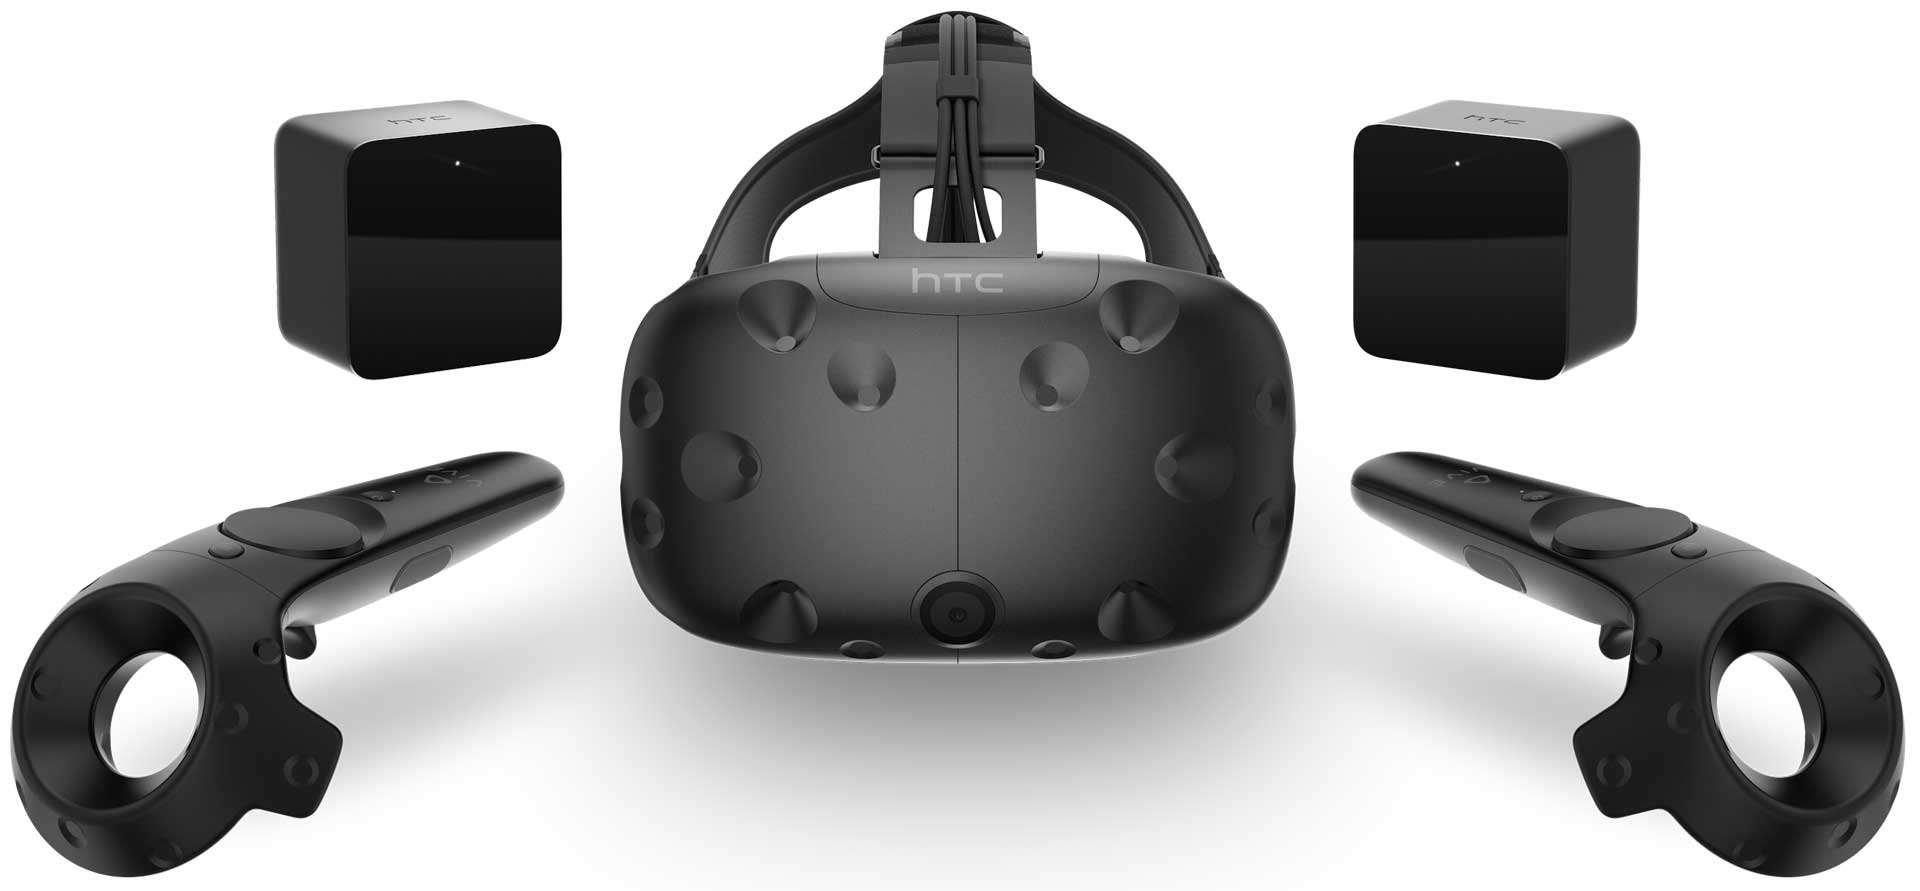 Image for HTC may sell off its Vive VR business - report